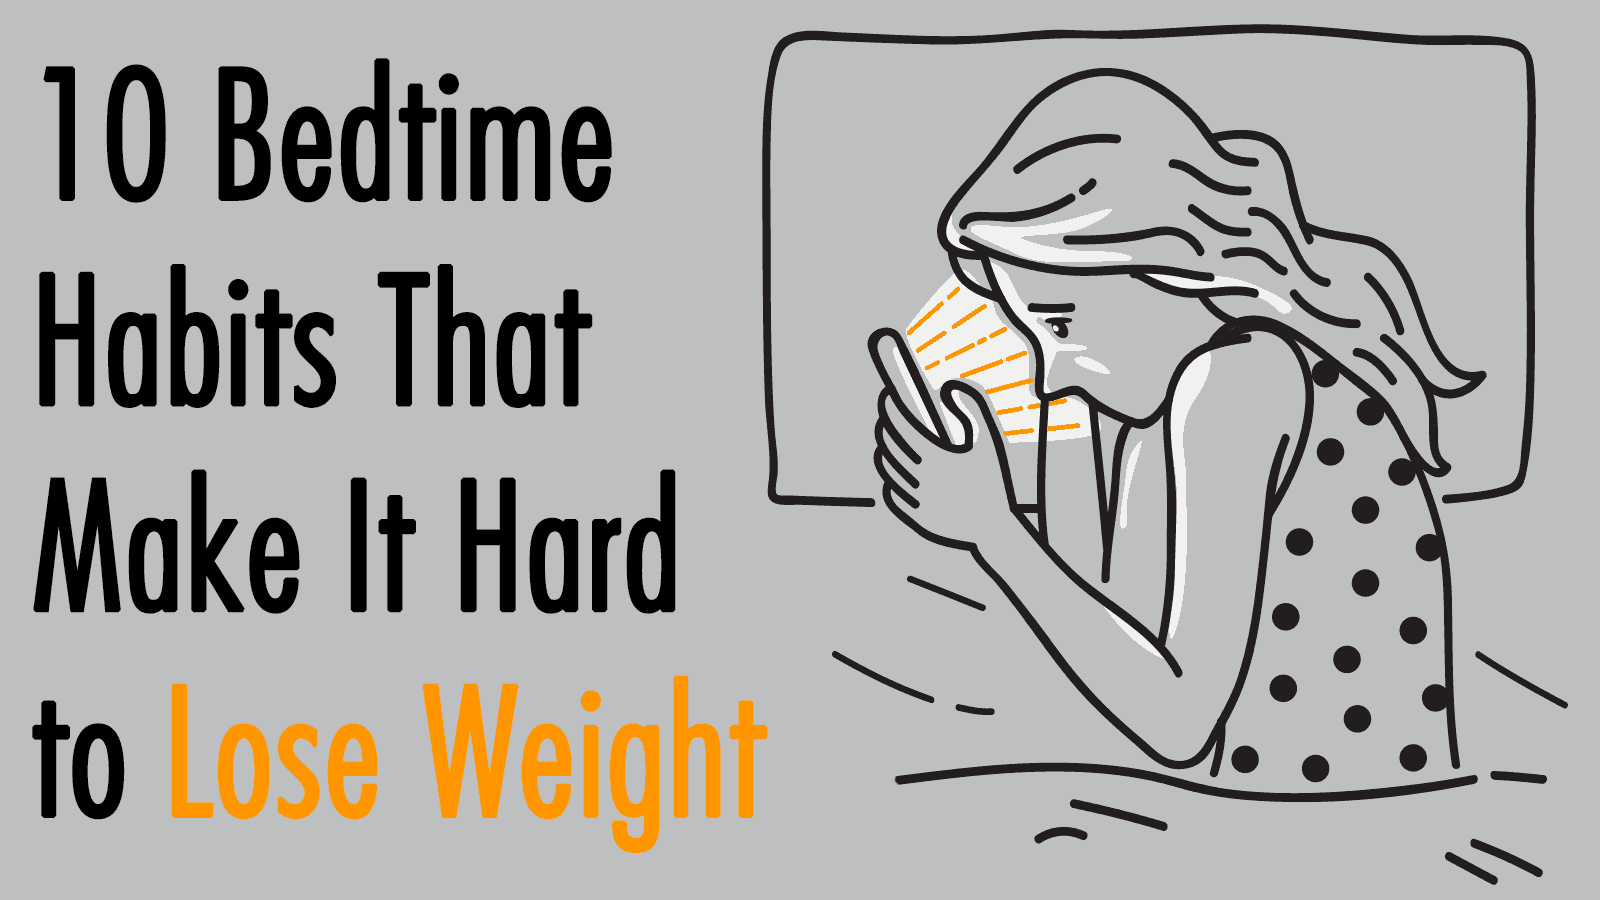 10 Bedtime Habits That Make It Hard to Lose Weight